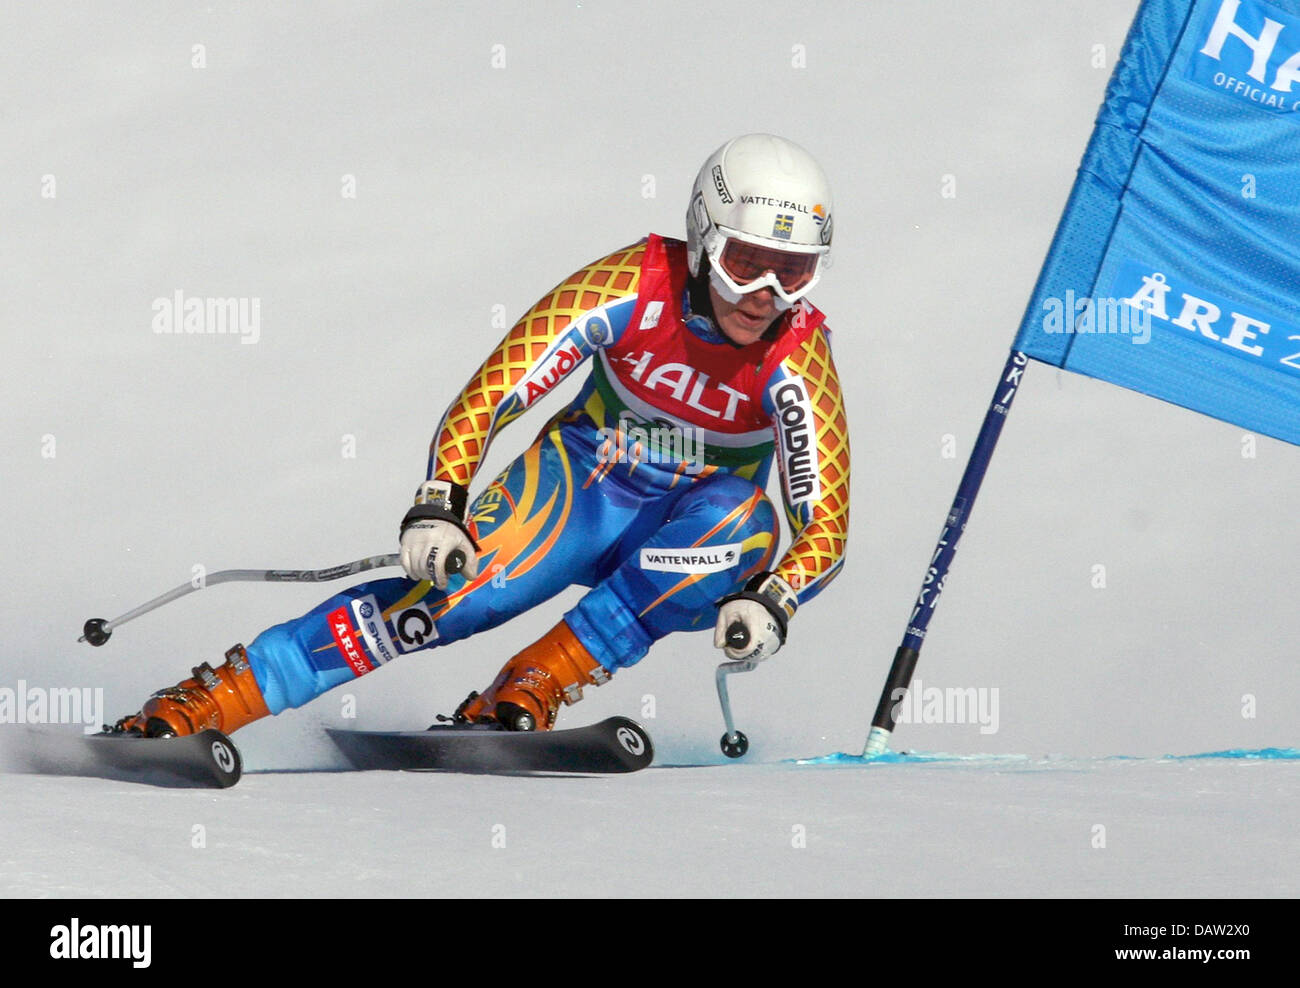 Swedish Nike Bent races down the course during the Women's Combined Downhill  of the Alpine Skiing World Championships Aare, Sweden, Friday 09 February  2007. The slalom will be the second and last